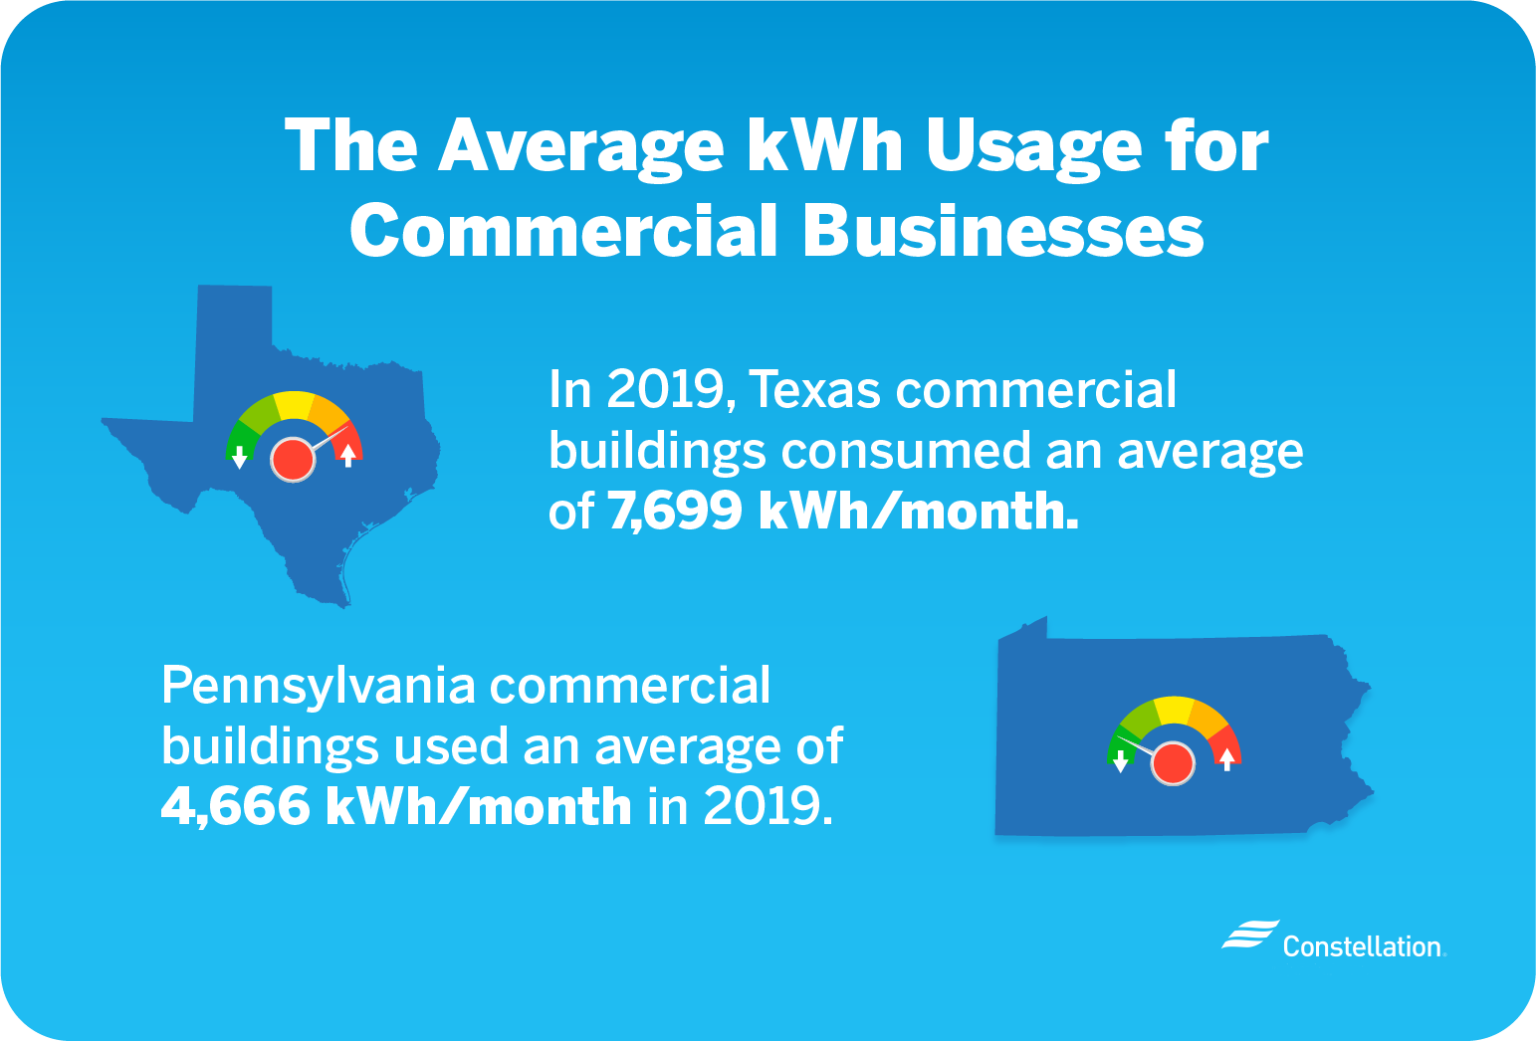 The Average kWh Usage for Small Businesses